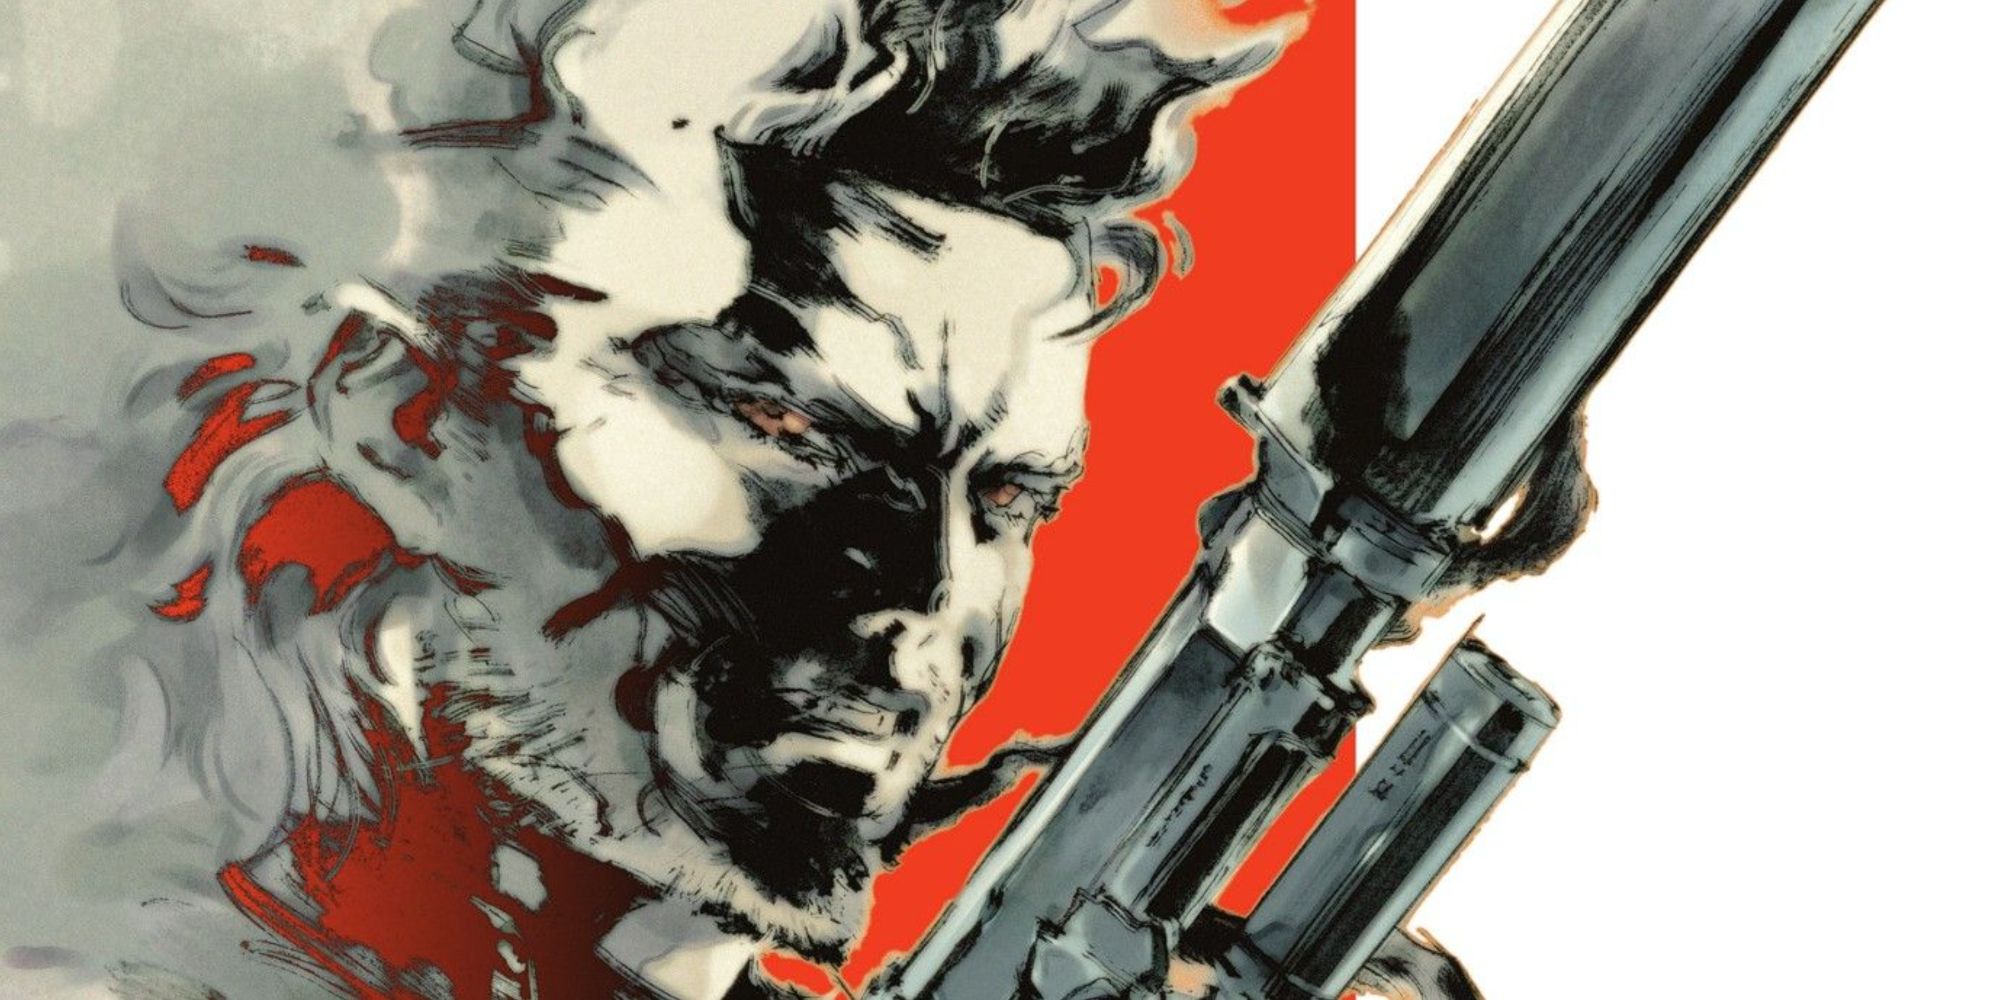 Metal Gear Solid 2 box art depicting a stylized Solid Snake holding a pistol with a silencer attached